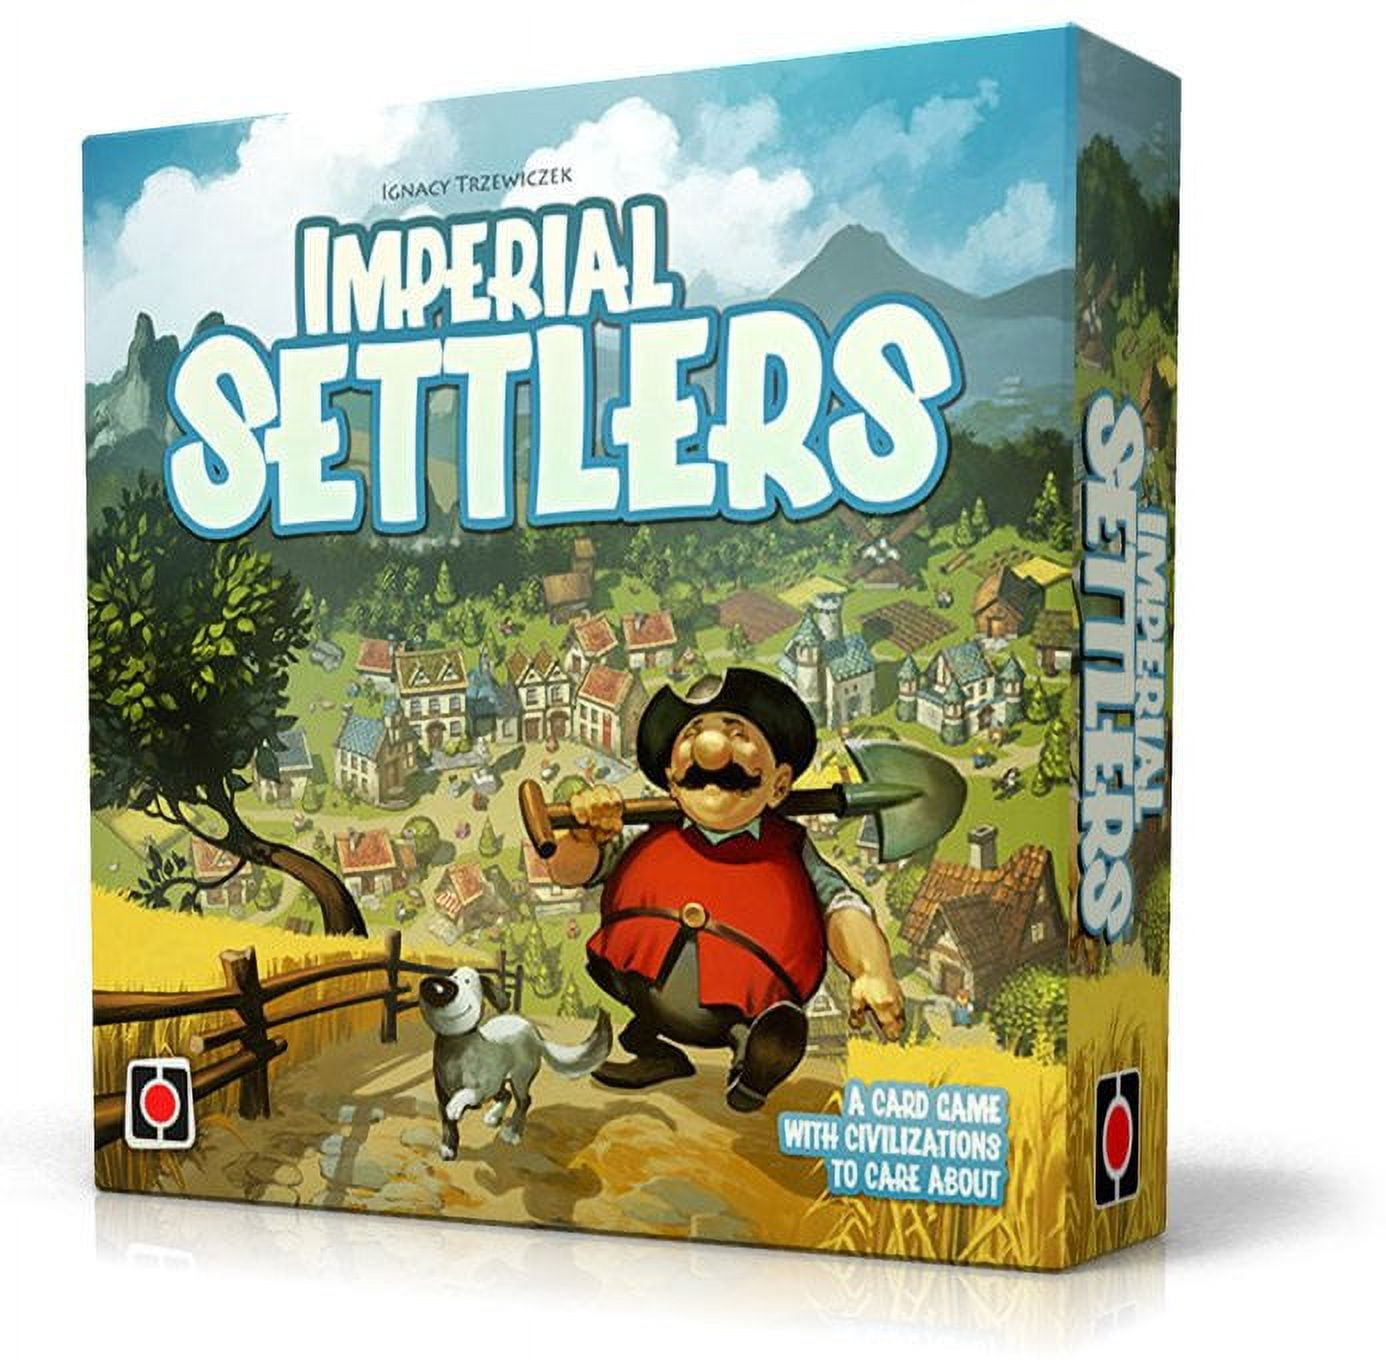 Plg0565 Imperial Settlers Game